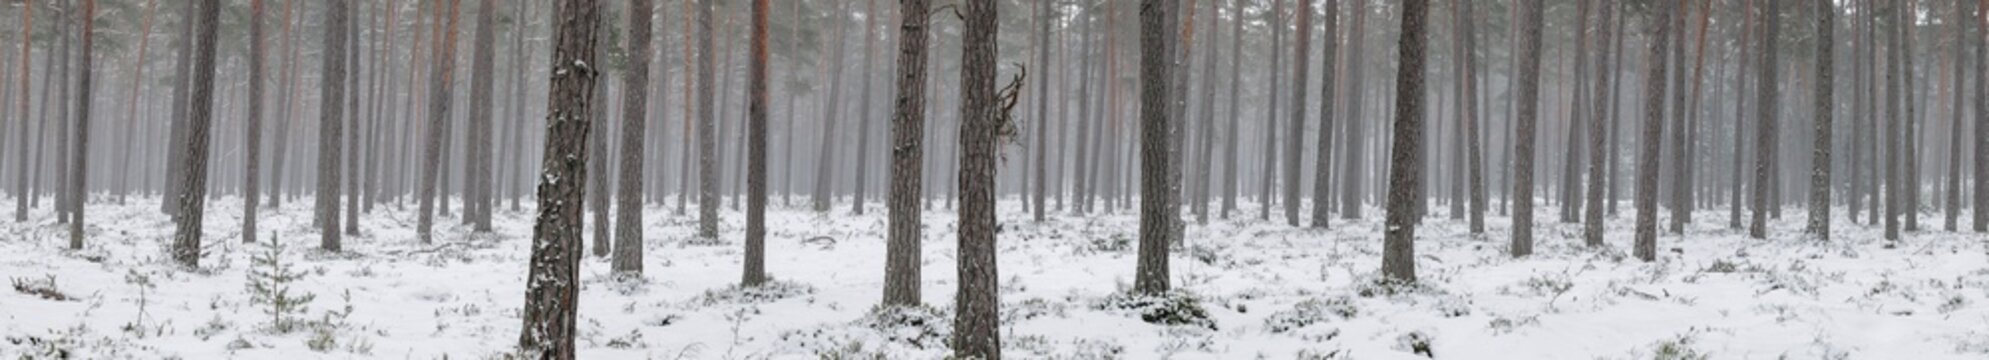 Panorama of slightly misty snowy pine tree forest